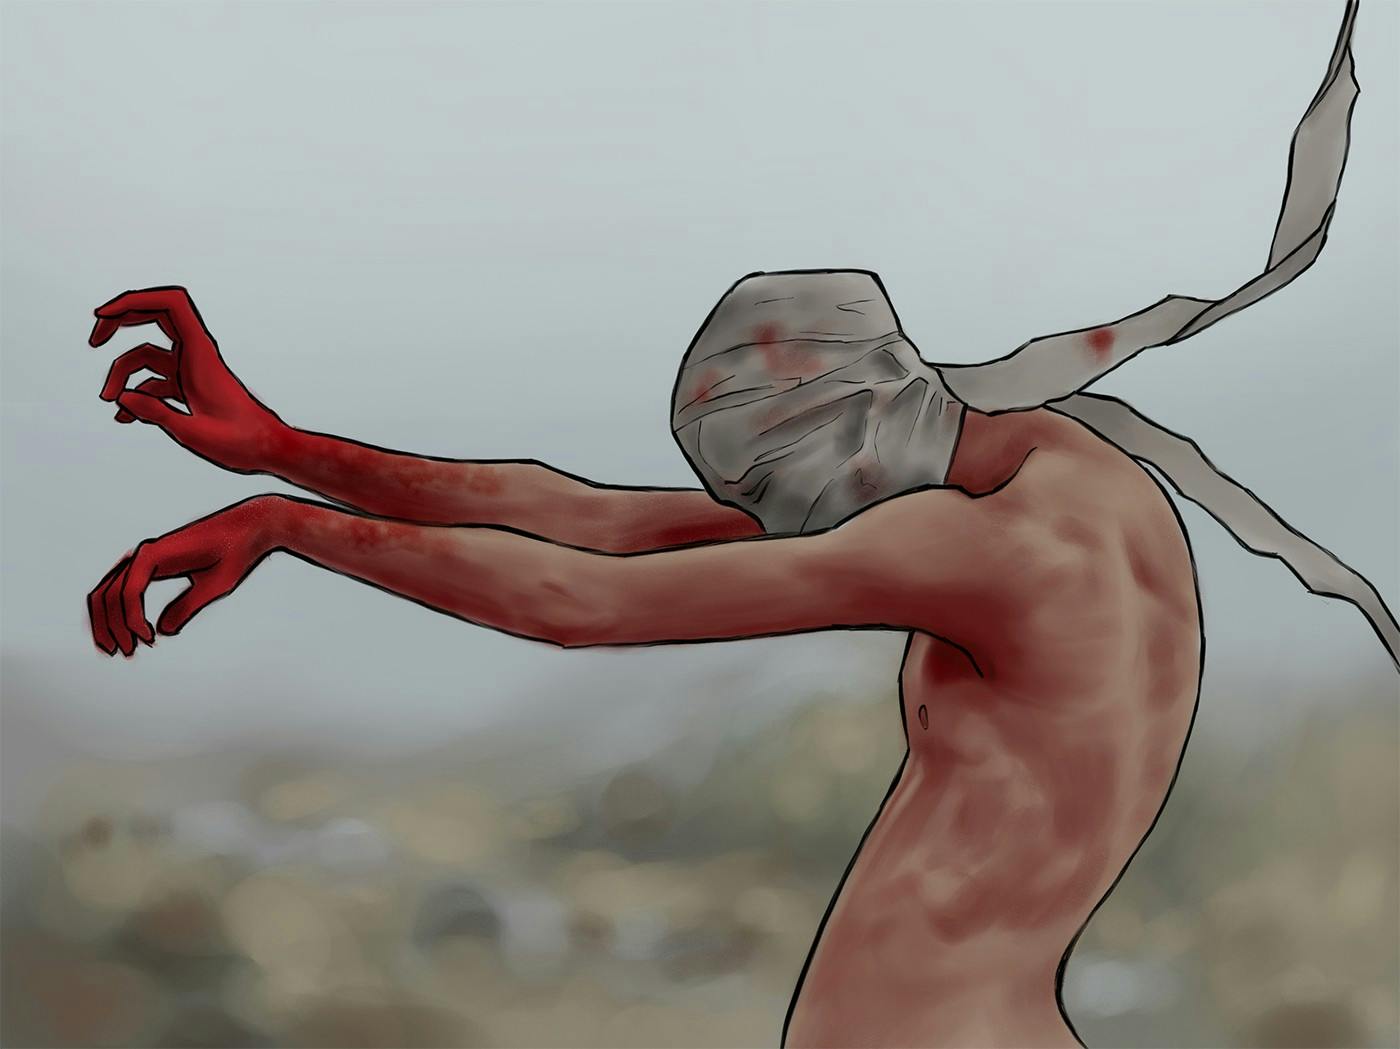 A digital illustration of a shirtless man in profile from the waist up wearing blood-stained cloth bandages covering his head; his arms are held out in a loose hadouken and his hands are covered in blood.